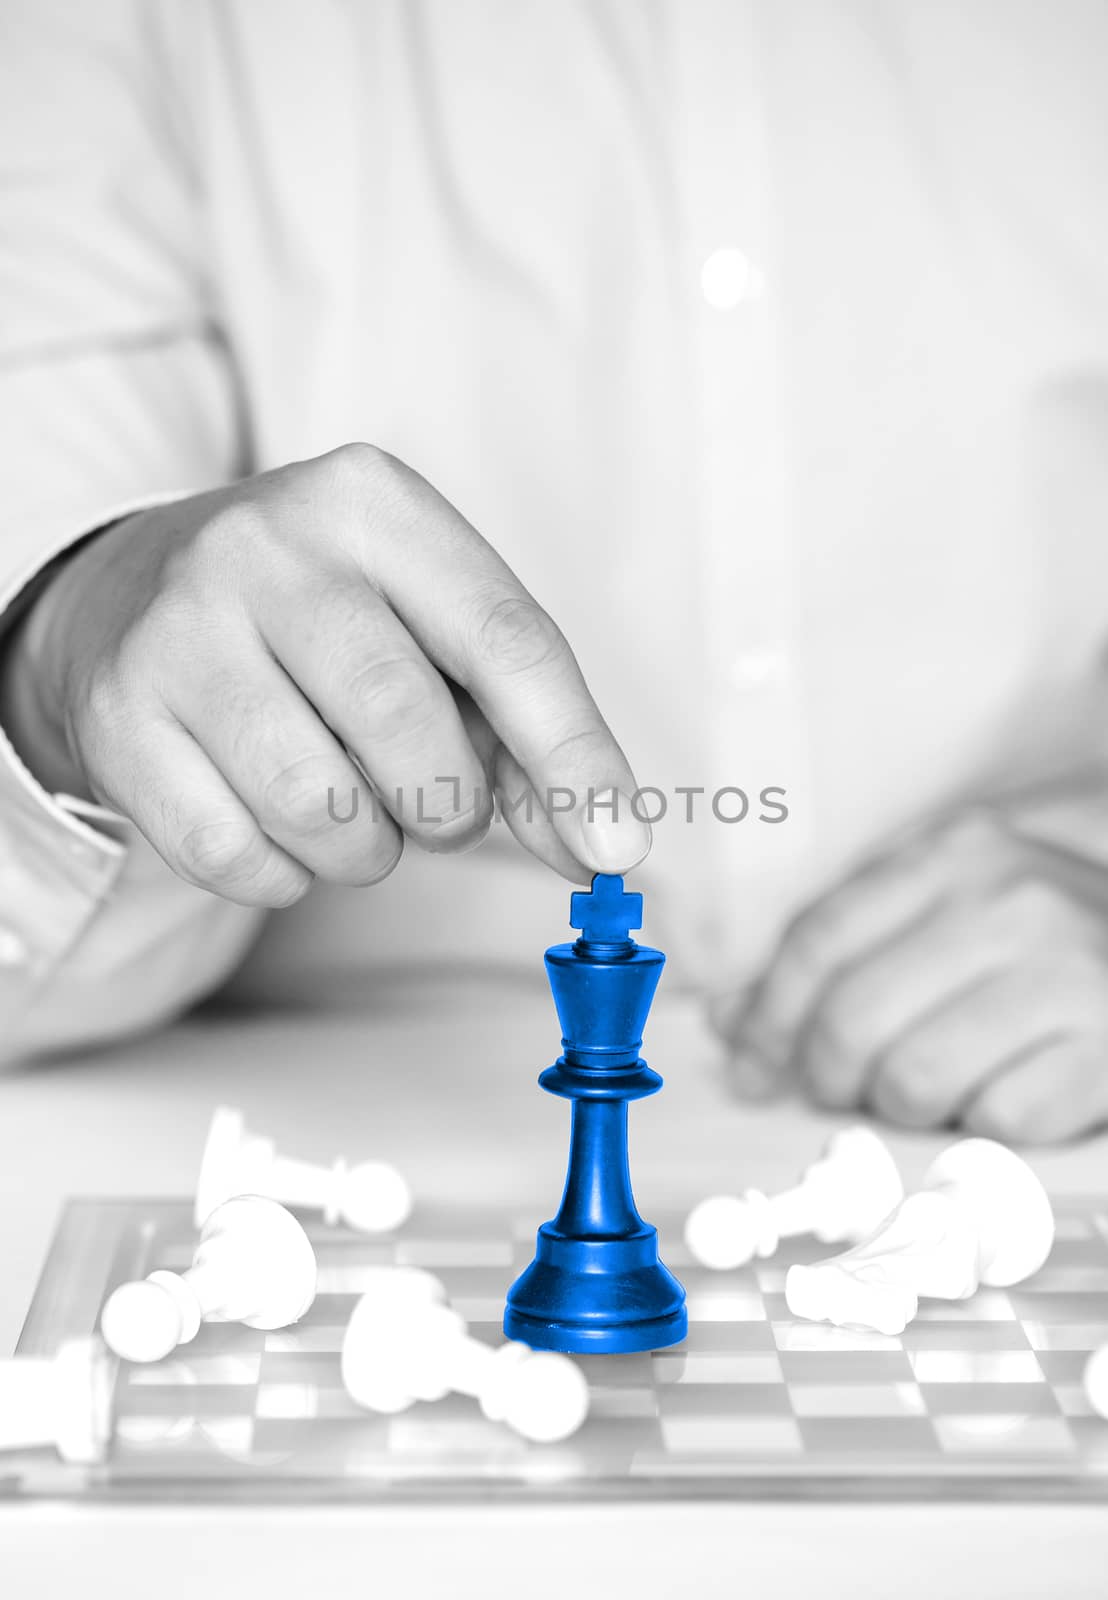 Chess business concept, leader & success

